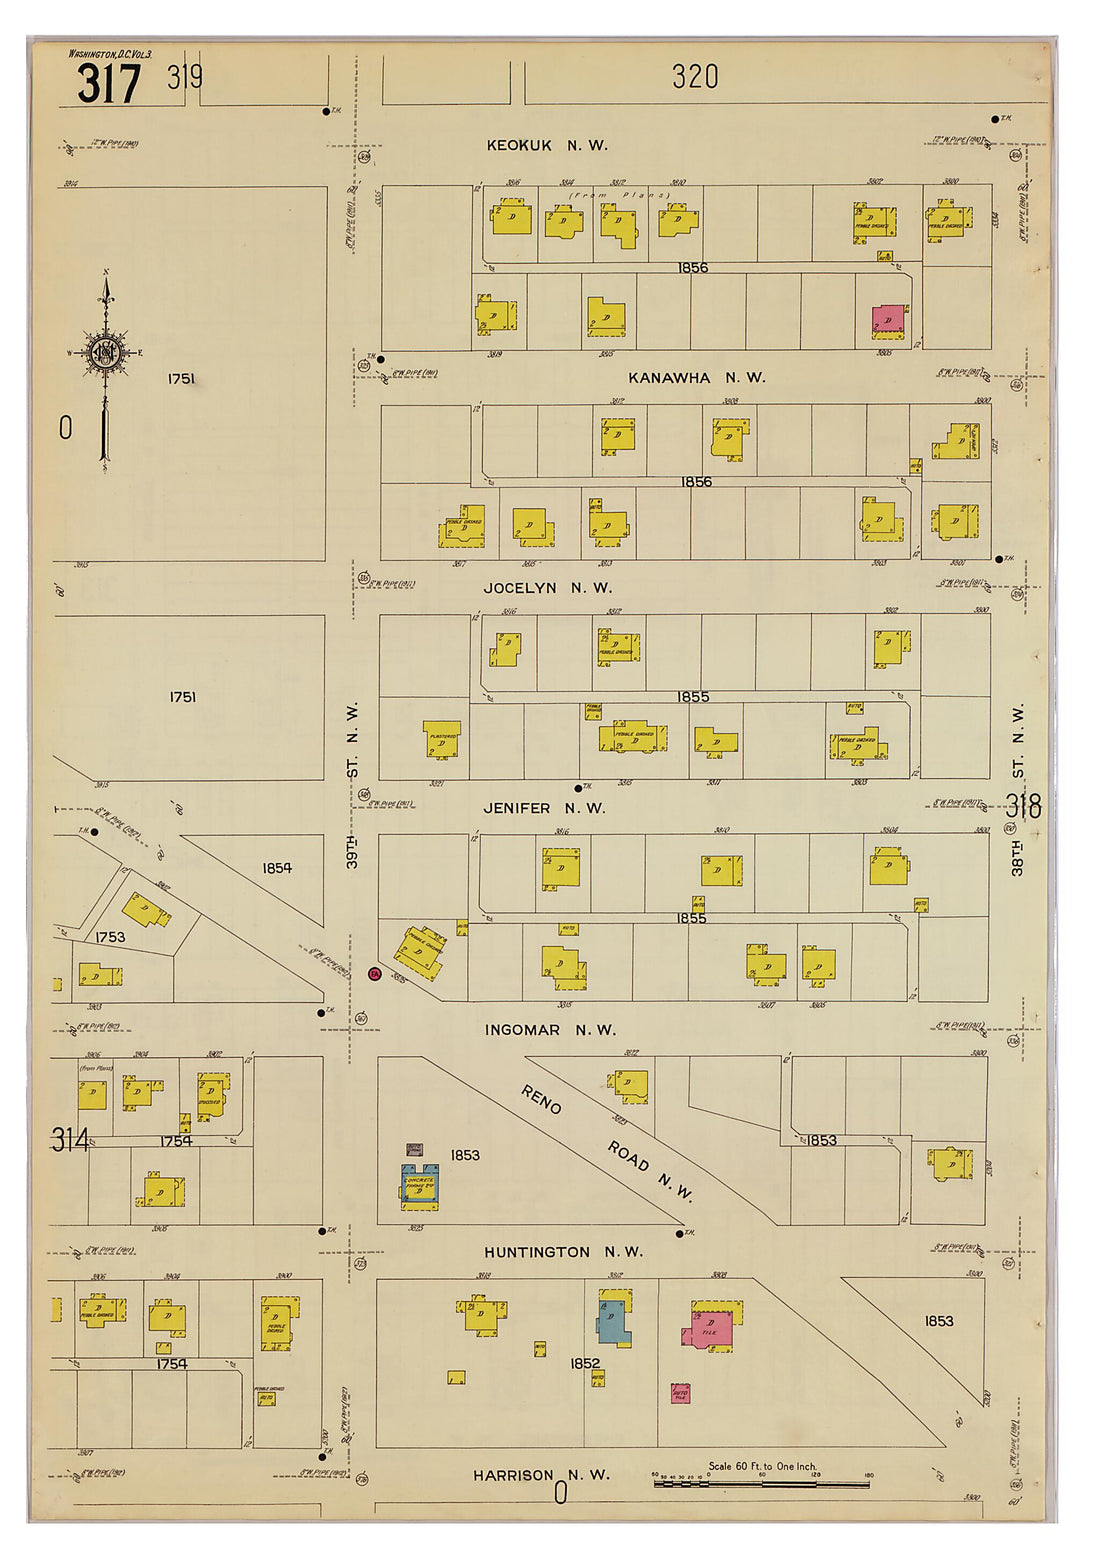 This old map of Takoma Park, Washington D.C. was created by Sanborn Map Company in 1916